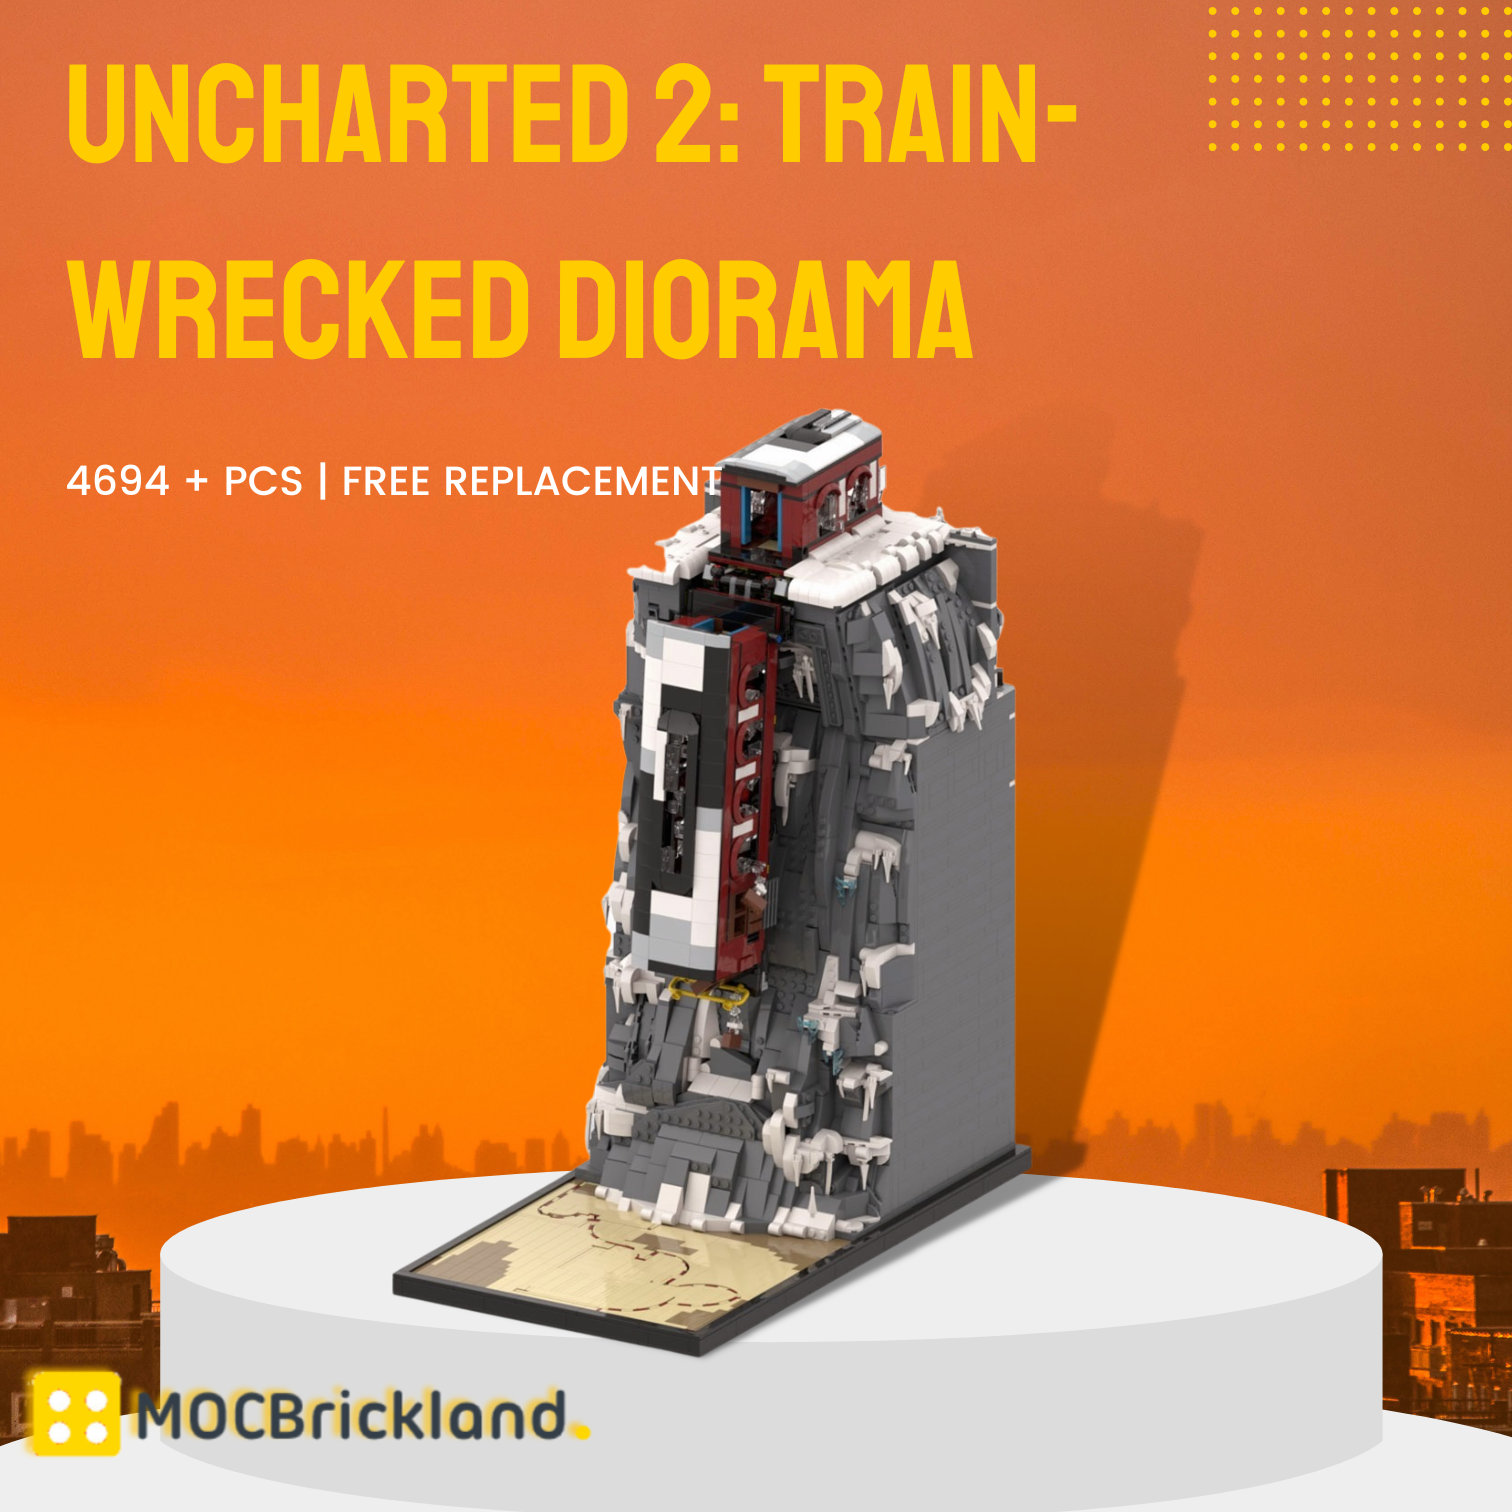 Uncharted 2: Train-wrecked Diorama MOC-125839 Creator With 4694 Pieces